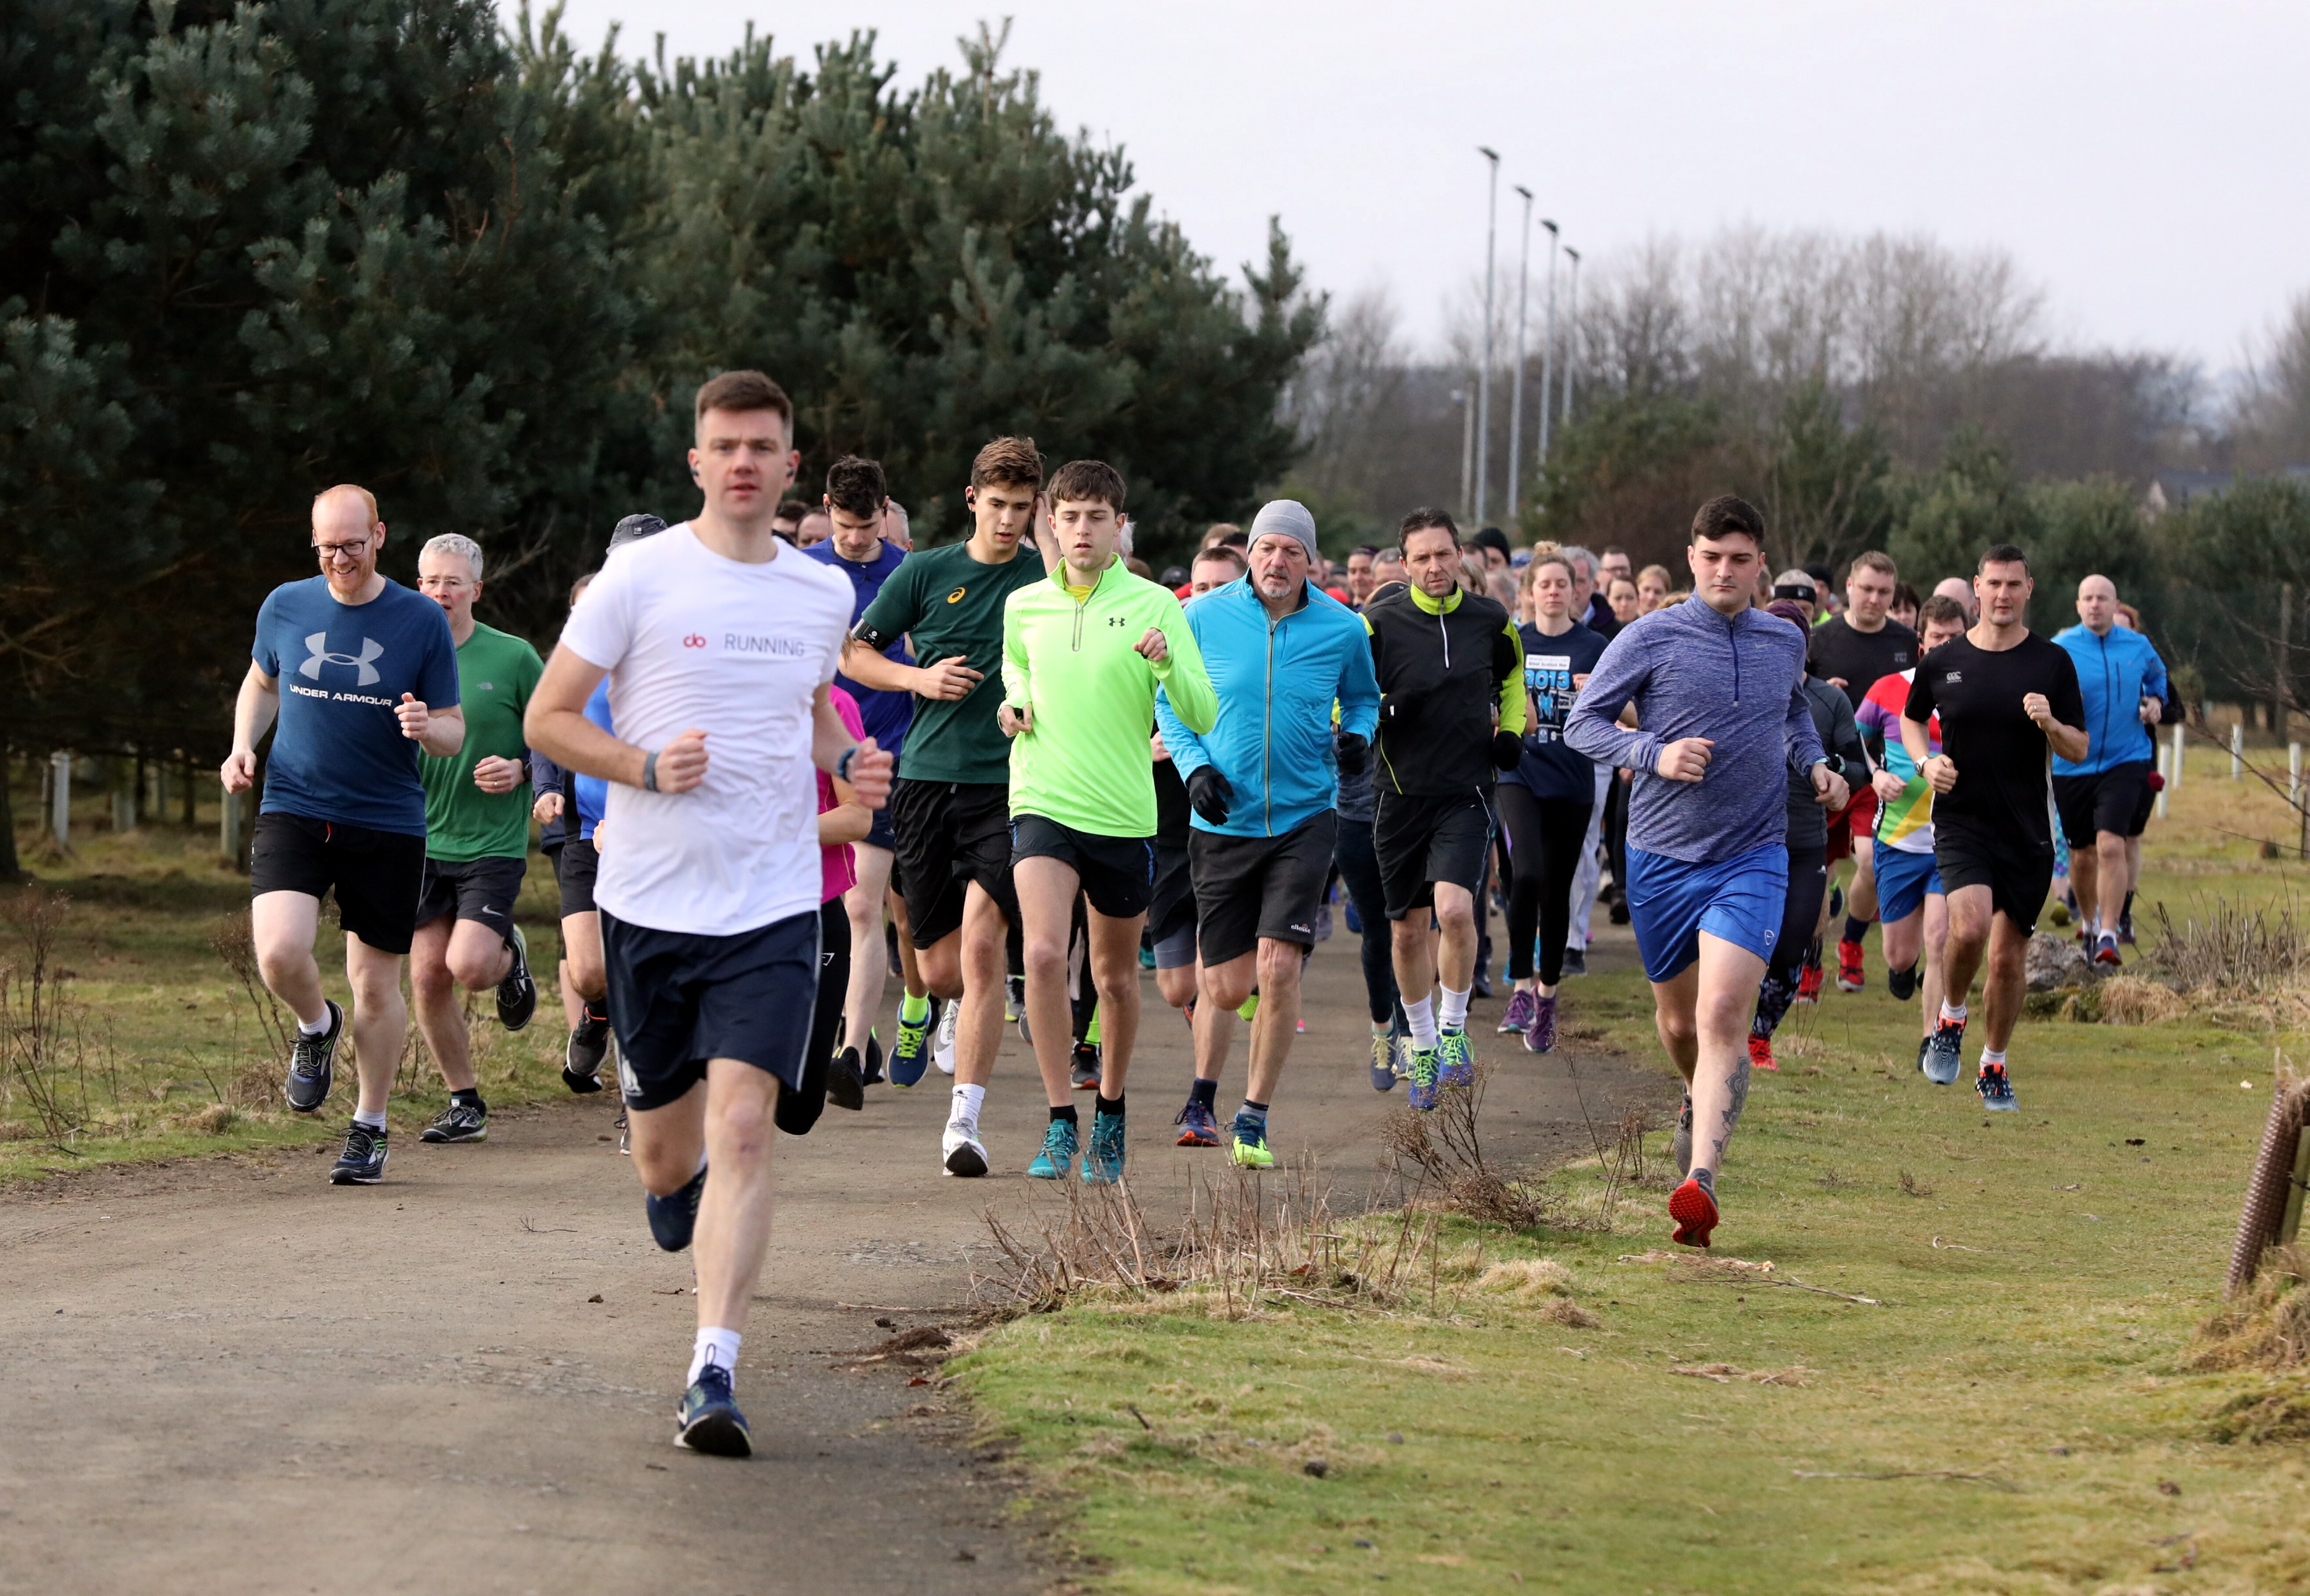 The parkrun meets every Saturday in Montrose.